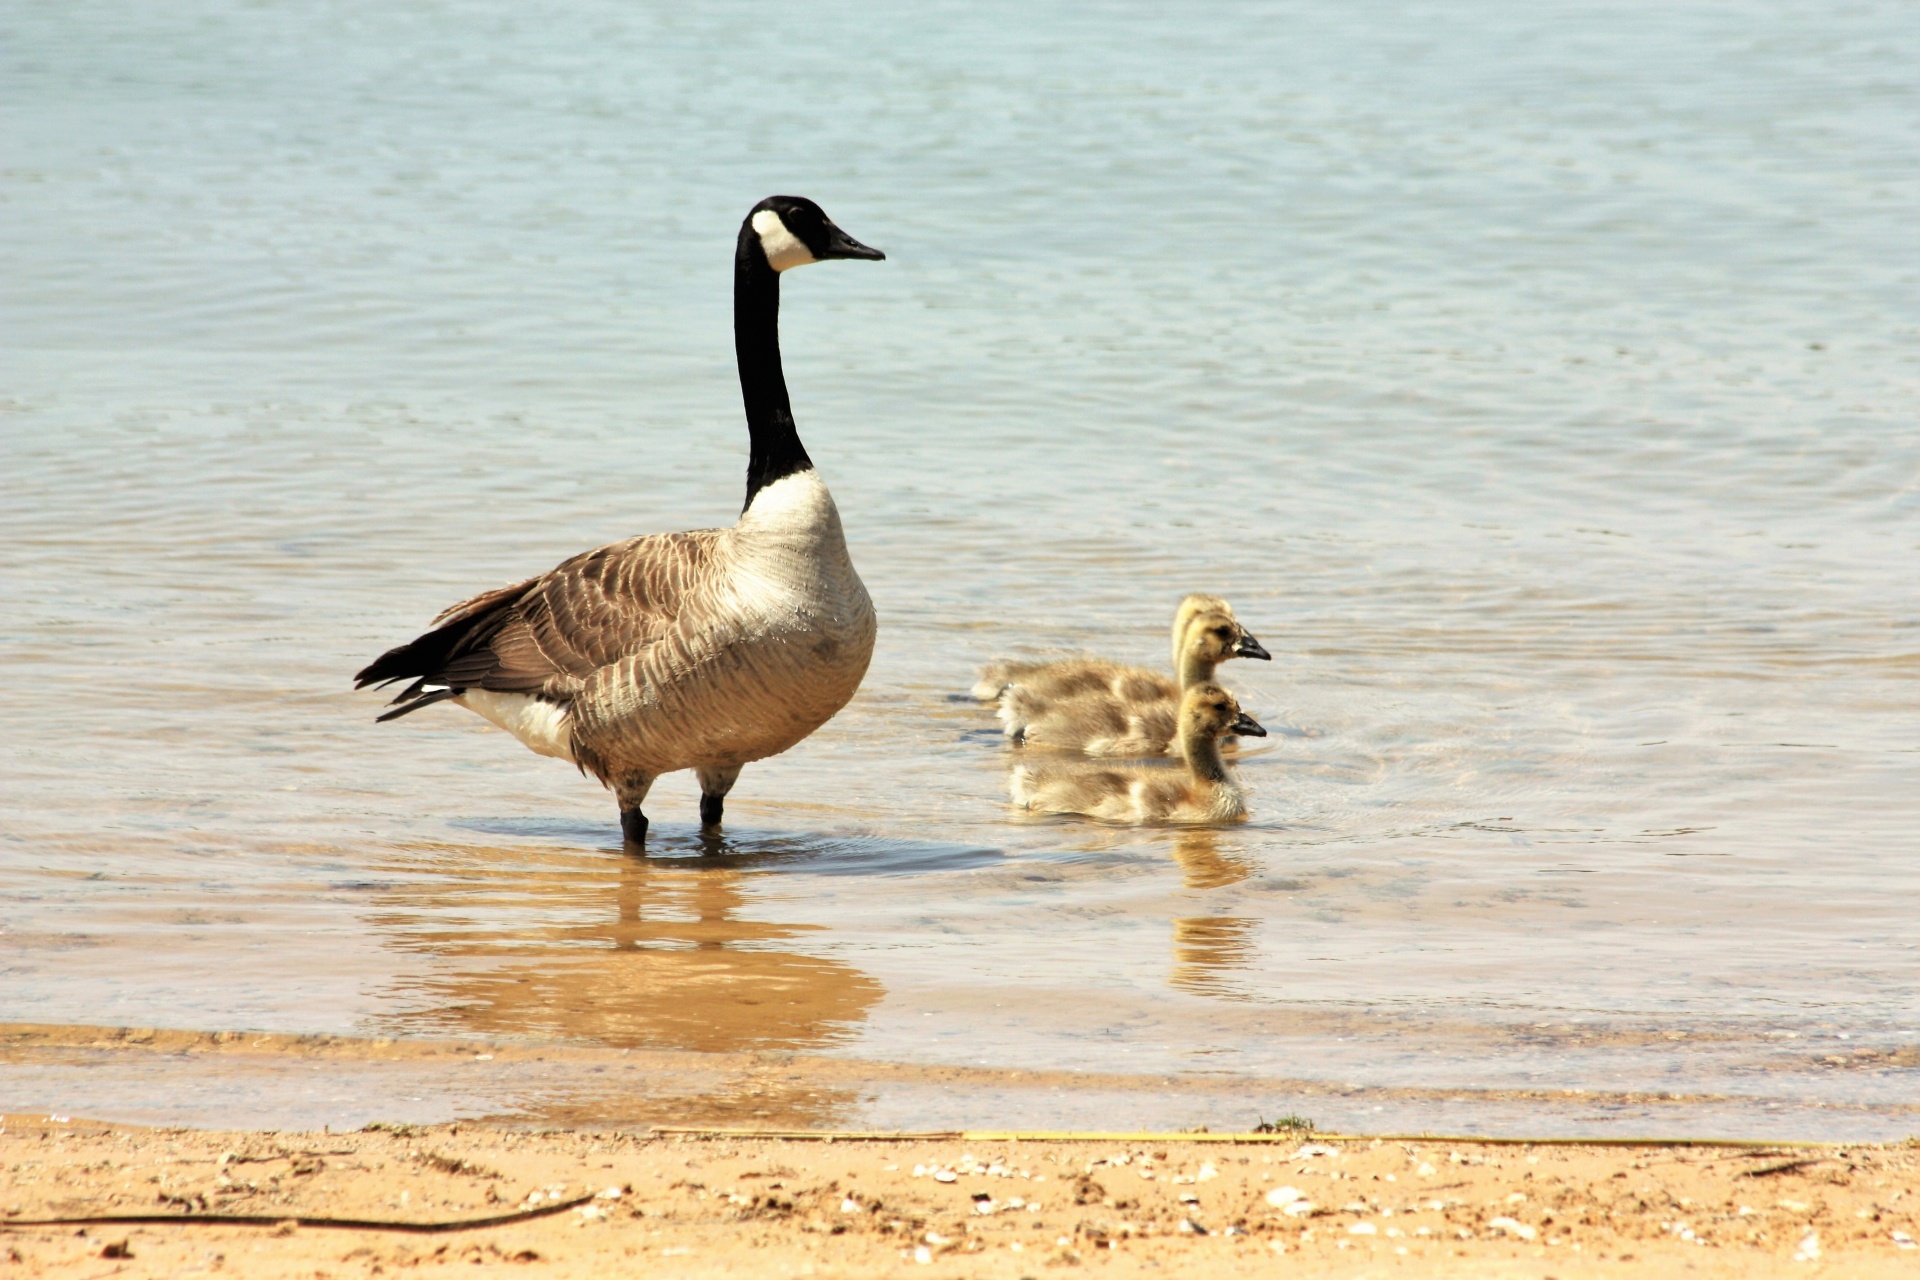 A mother Canada goose is watching over her three little goslings as they swim just off shore the lake.